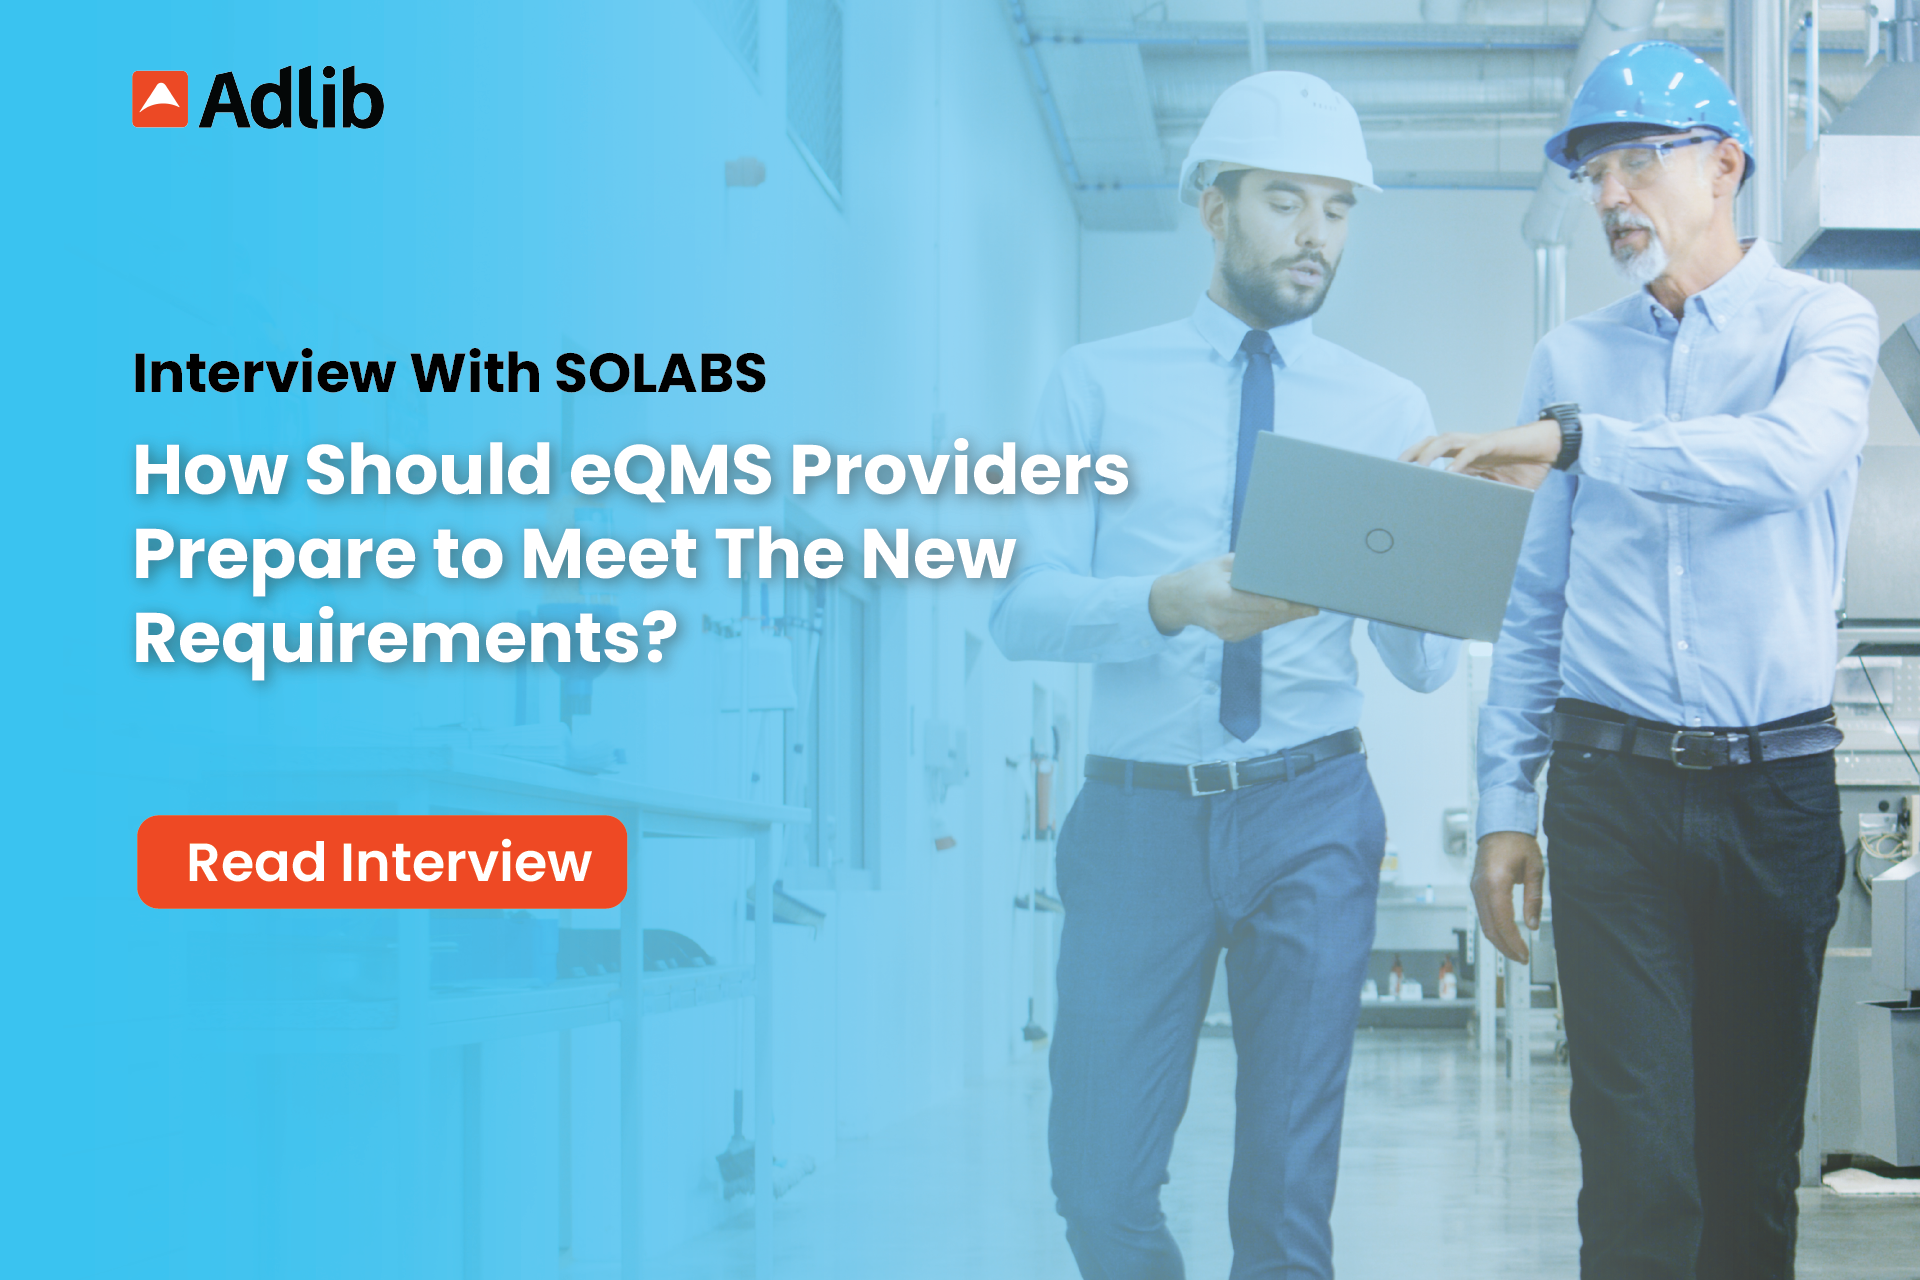 What Are The Emerging eQMS Requirements And How Should Providers Prepare For Them? Featured Image